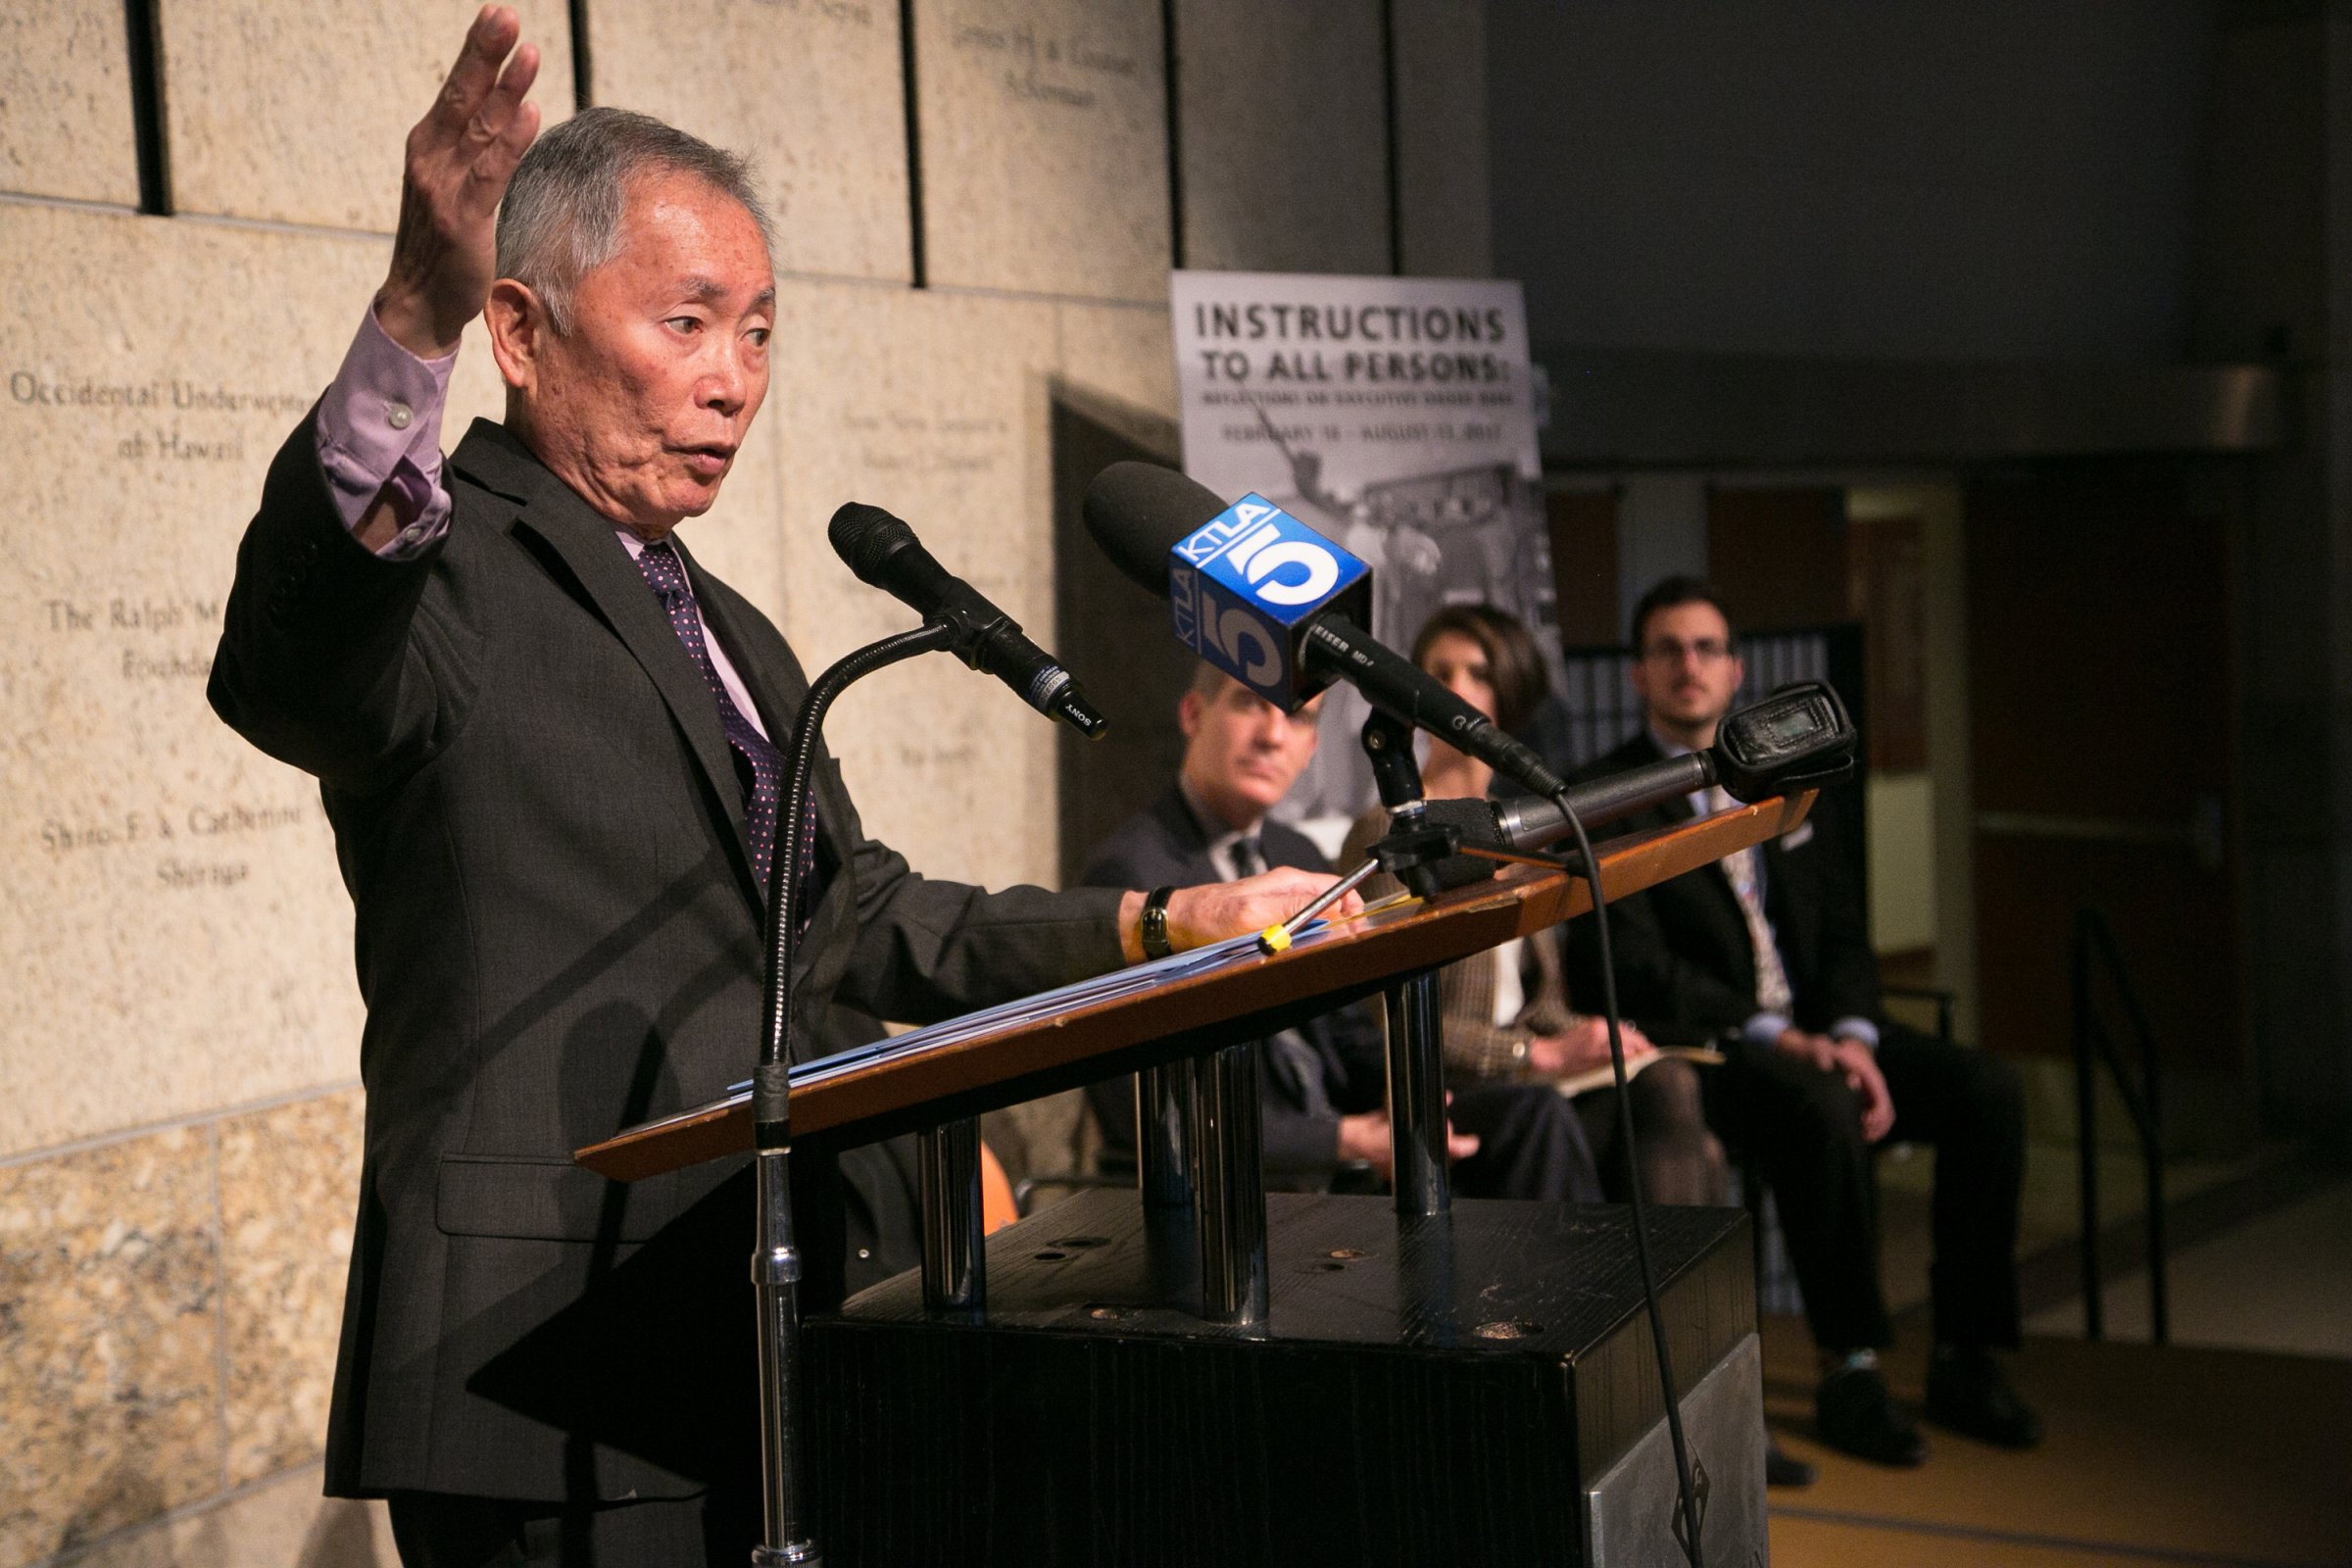 Press Conference For The Japanese American National Museum's Exhibition "Instructions To All Persons: Reflections On Executive Order 9066"